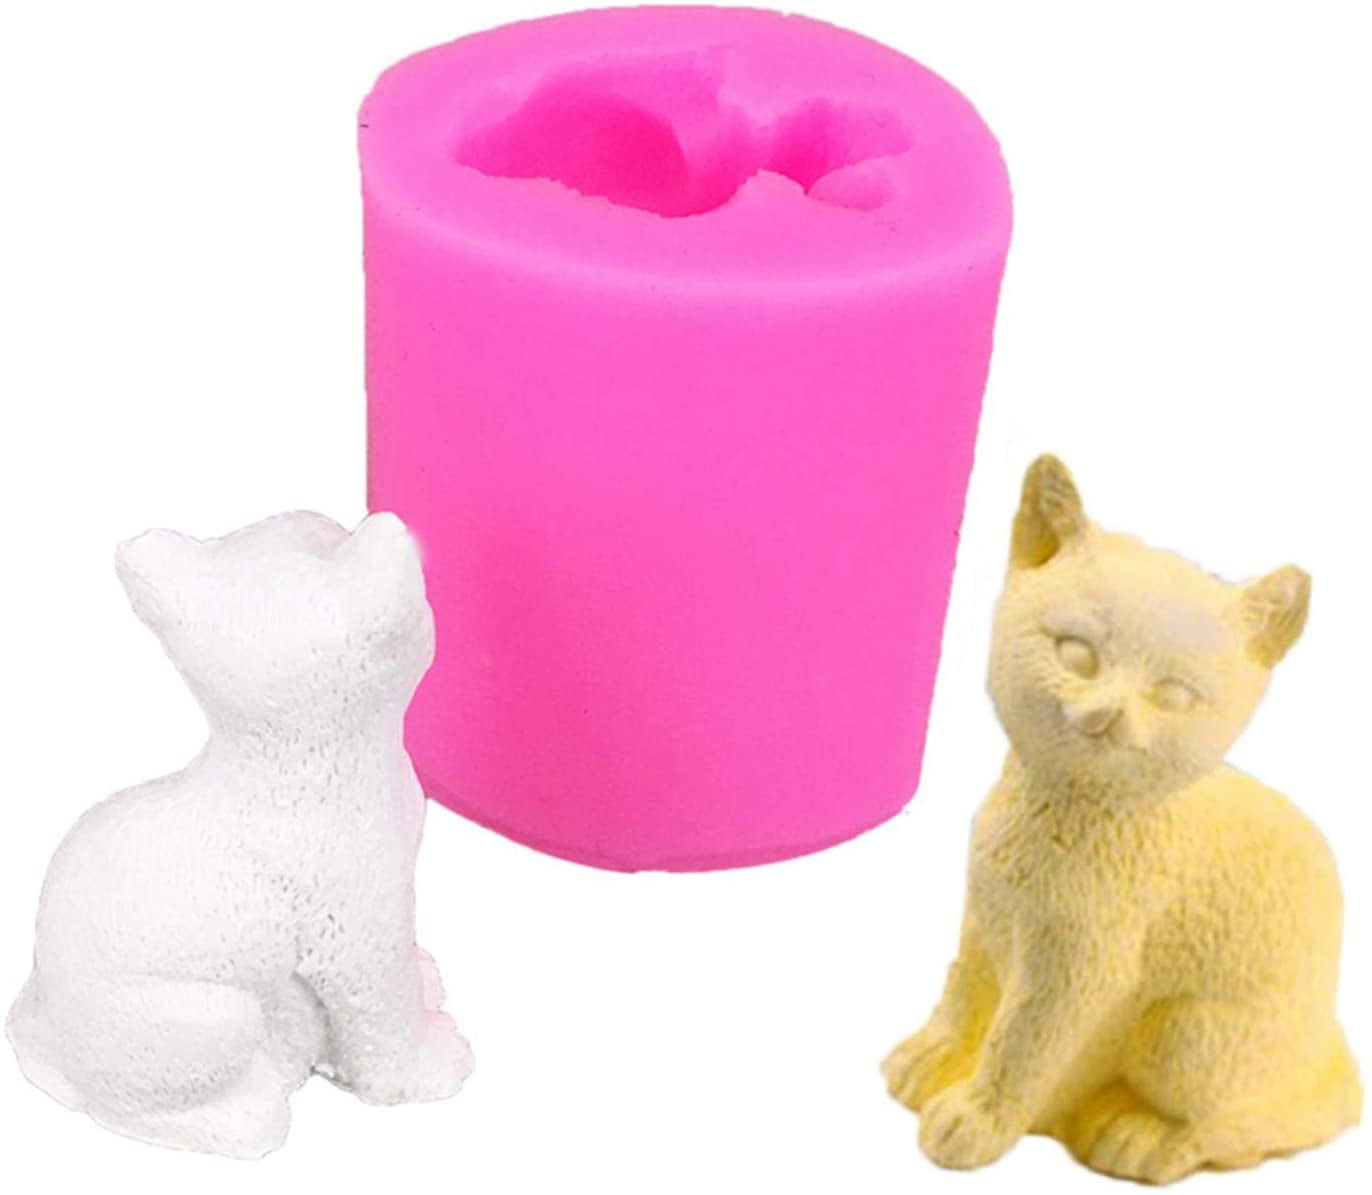 Small Cat Candle Silicone Mold 3D Craft Soap Mold Candy Chocolate Fondant Mould 